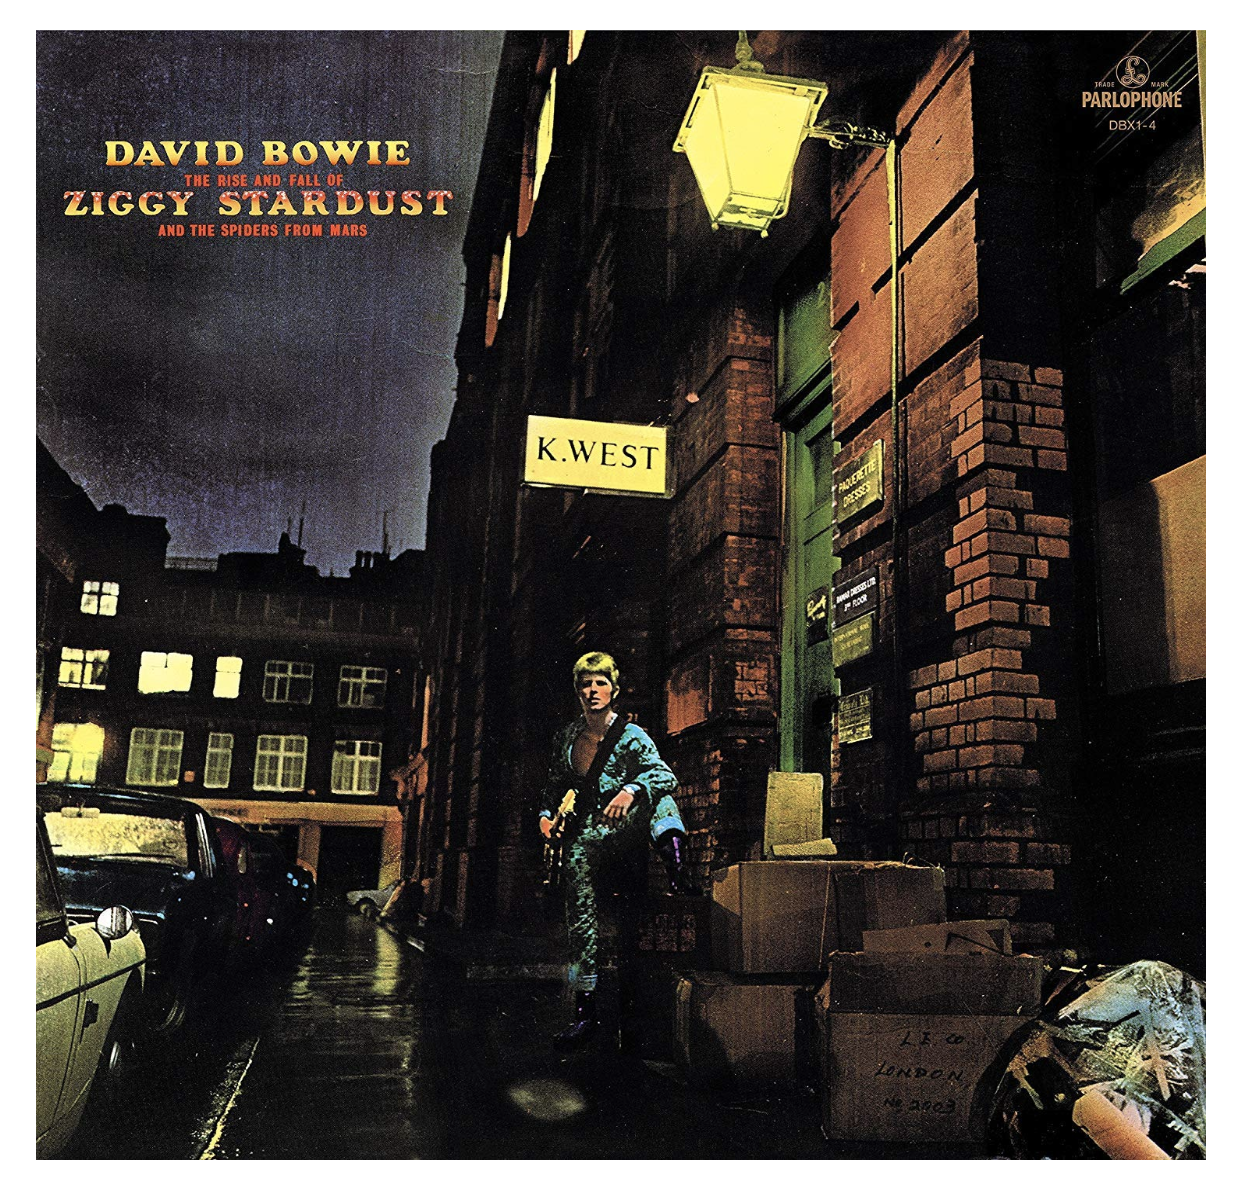 'The Rise and Fall of Ziggy Stardust and the Spiders From Mars' - David Bowie